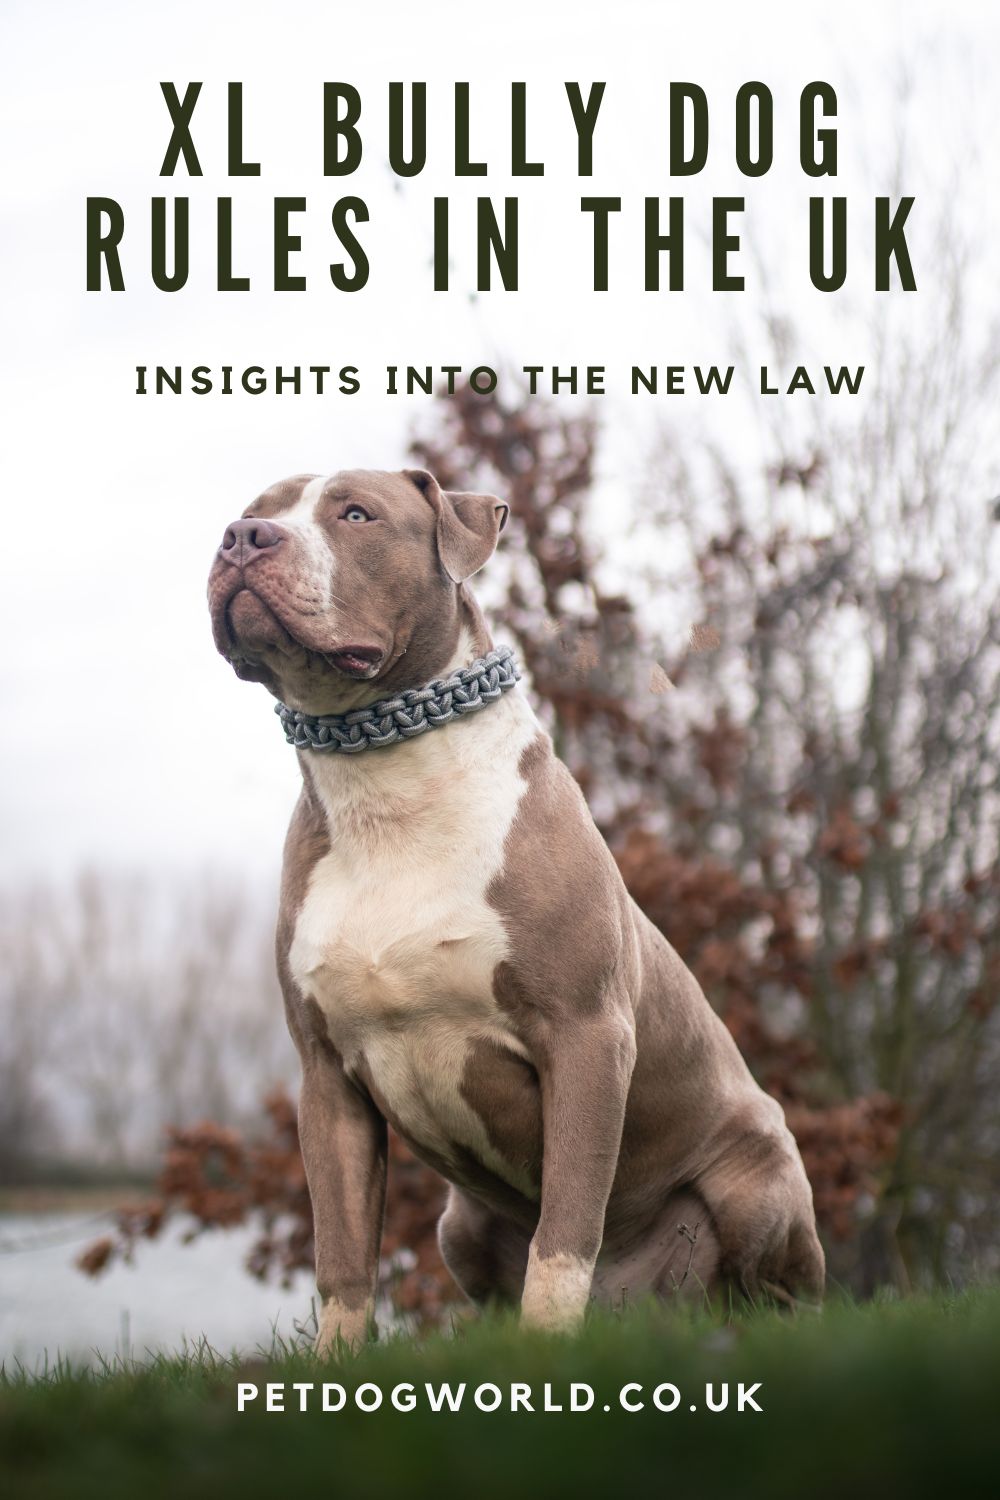 Explore the new UK law on Bully XL dogs. Understand its stages, implications for owners, and concerns raised by animal welfare groups.